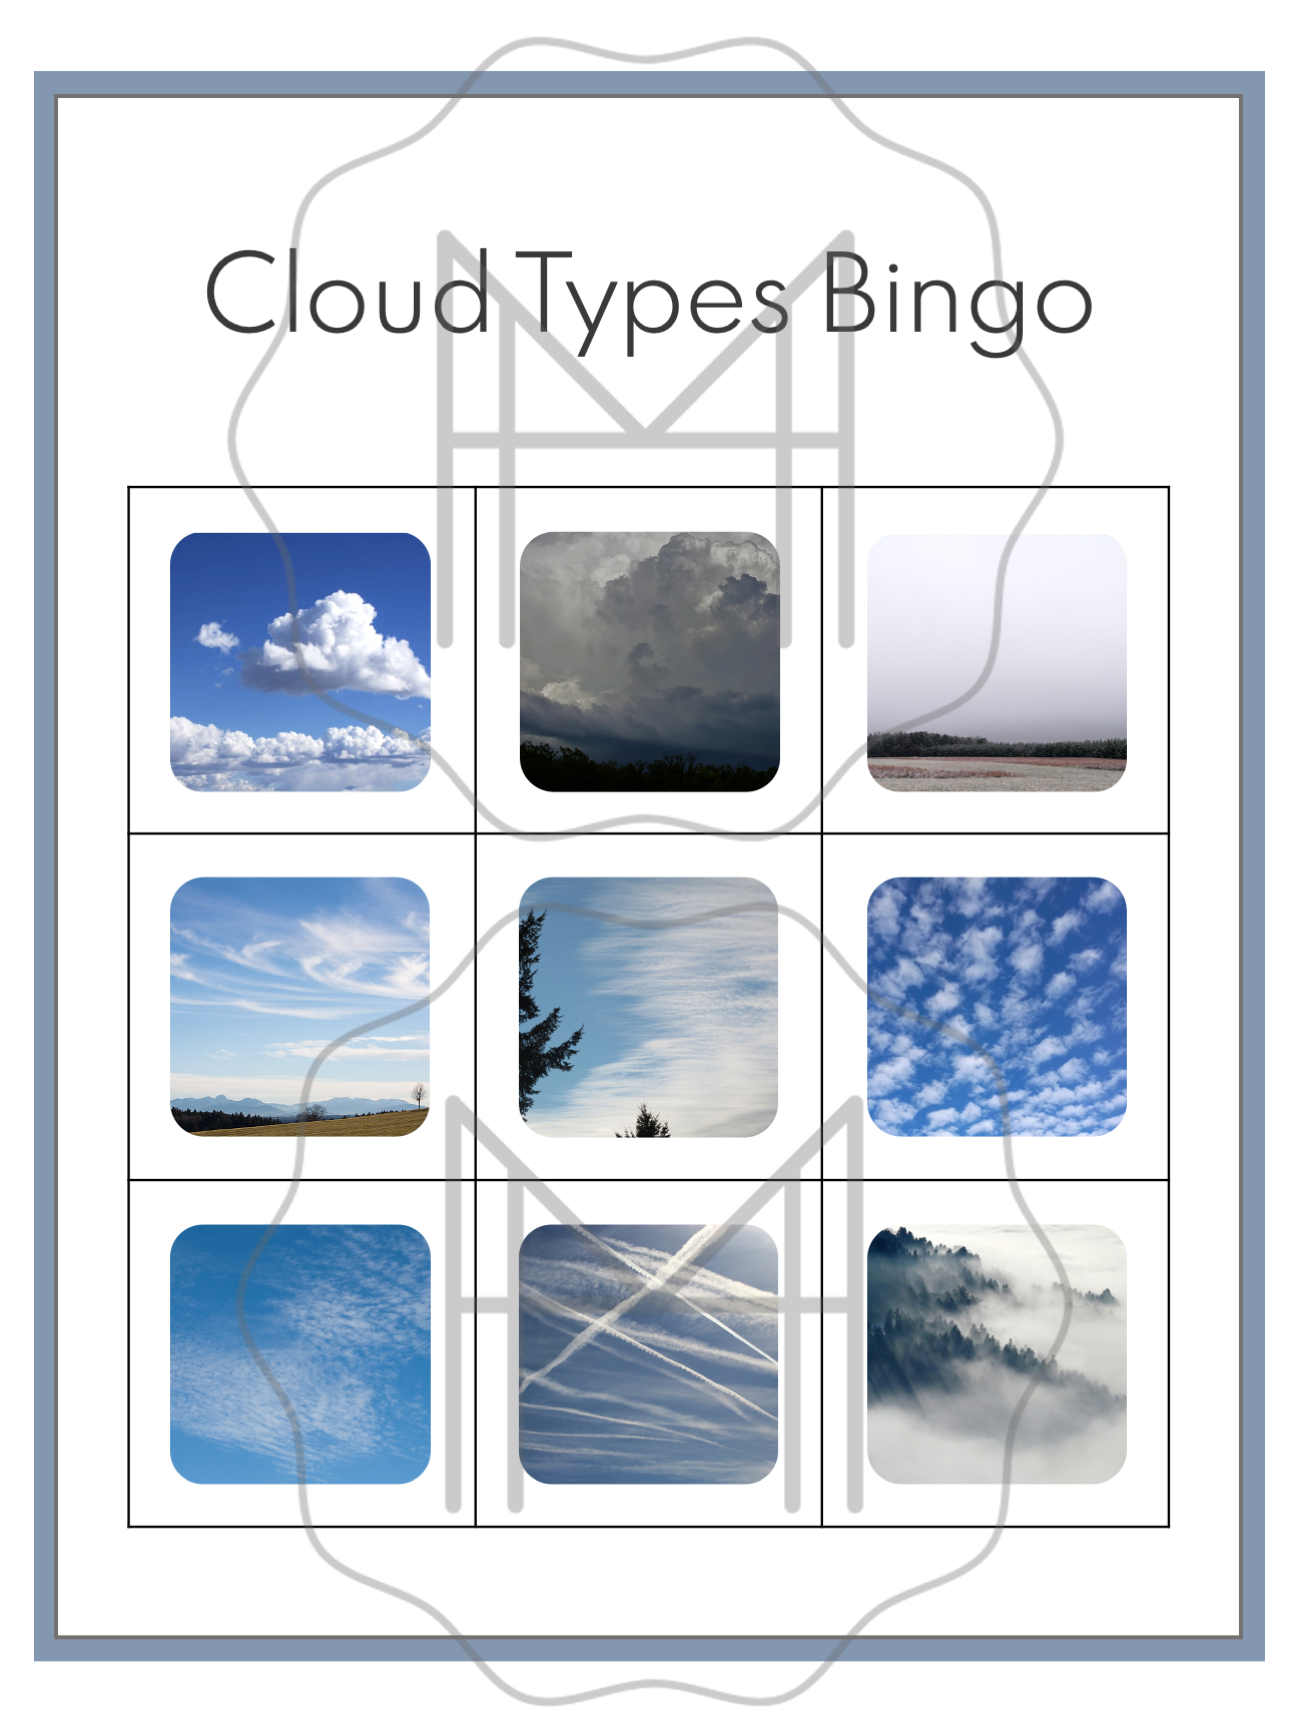 Cloud Types 3-Part Cards, Bingo, Experiment, Posters, and "I have... Who has?"